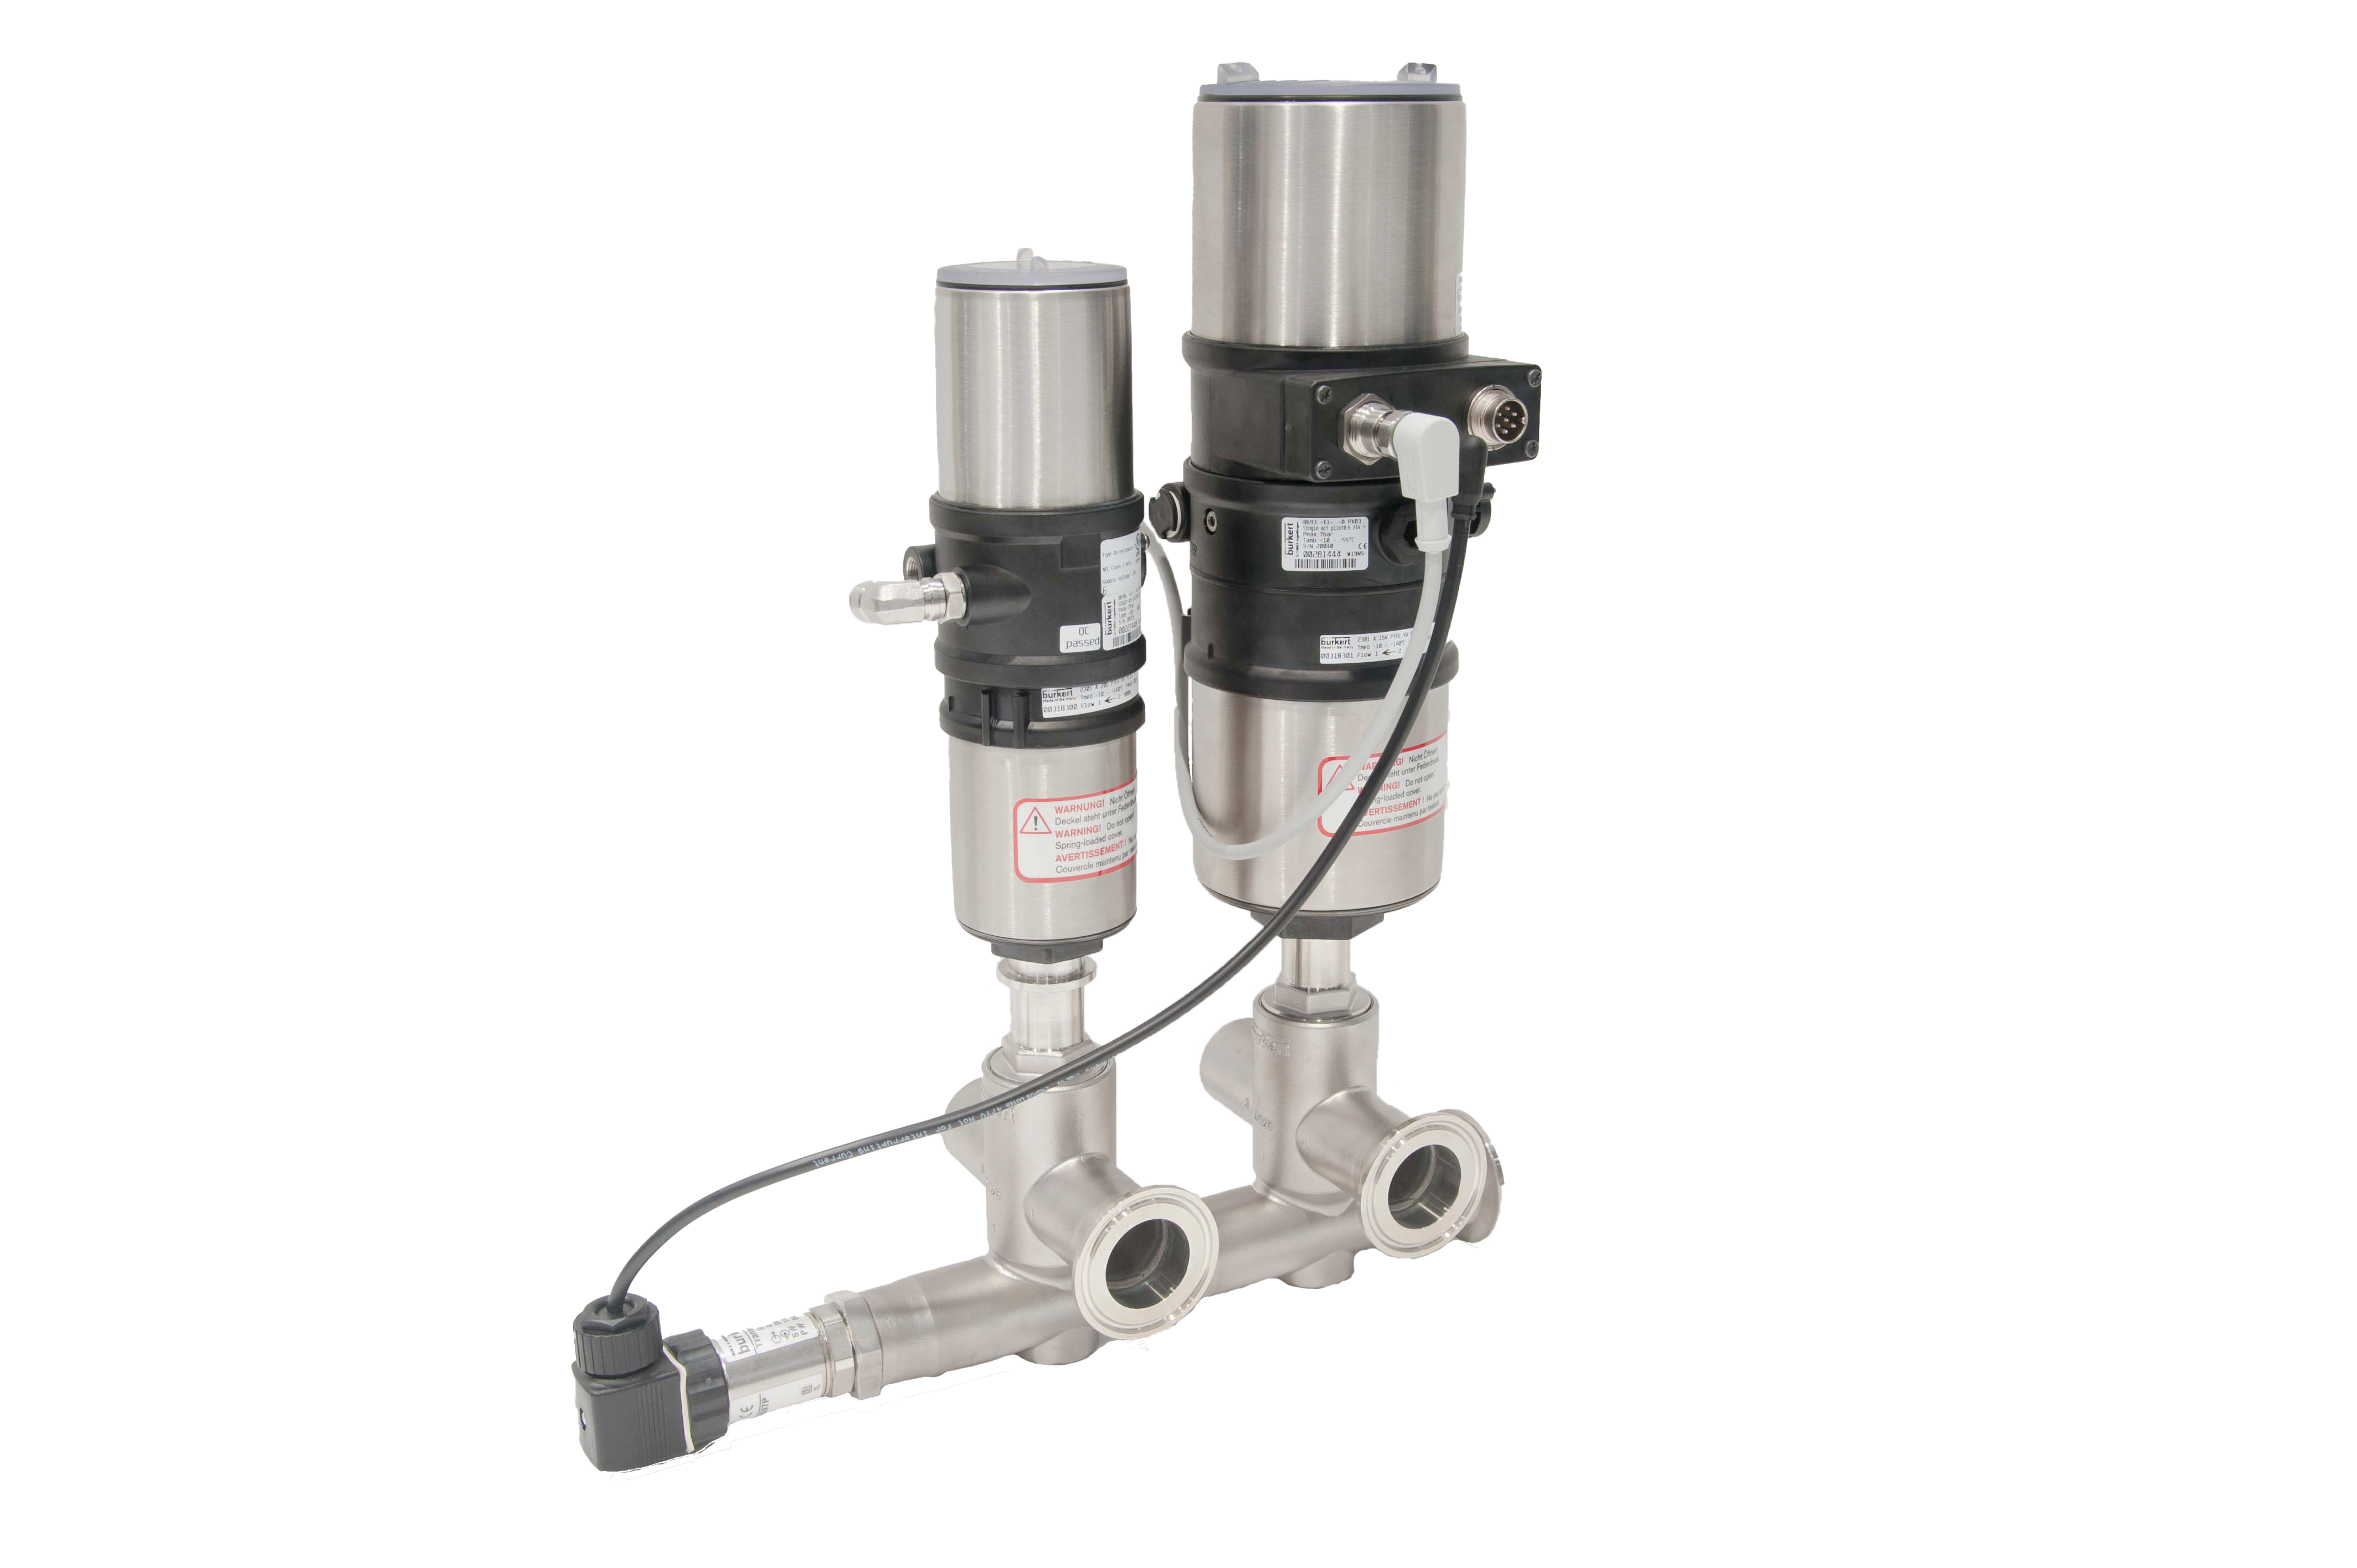 Pneumatic controls and the proximity of all the process control devices means the response time is at least halved compared to conventional systems.